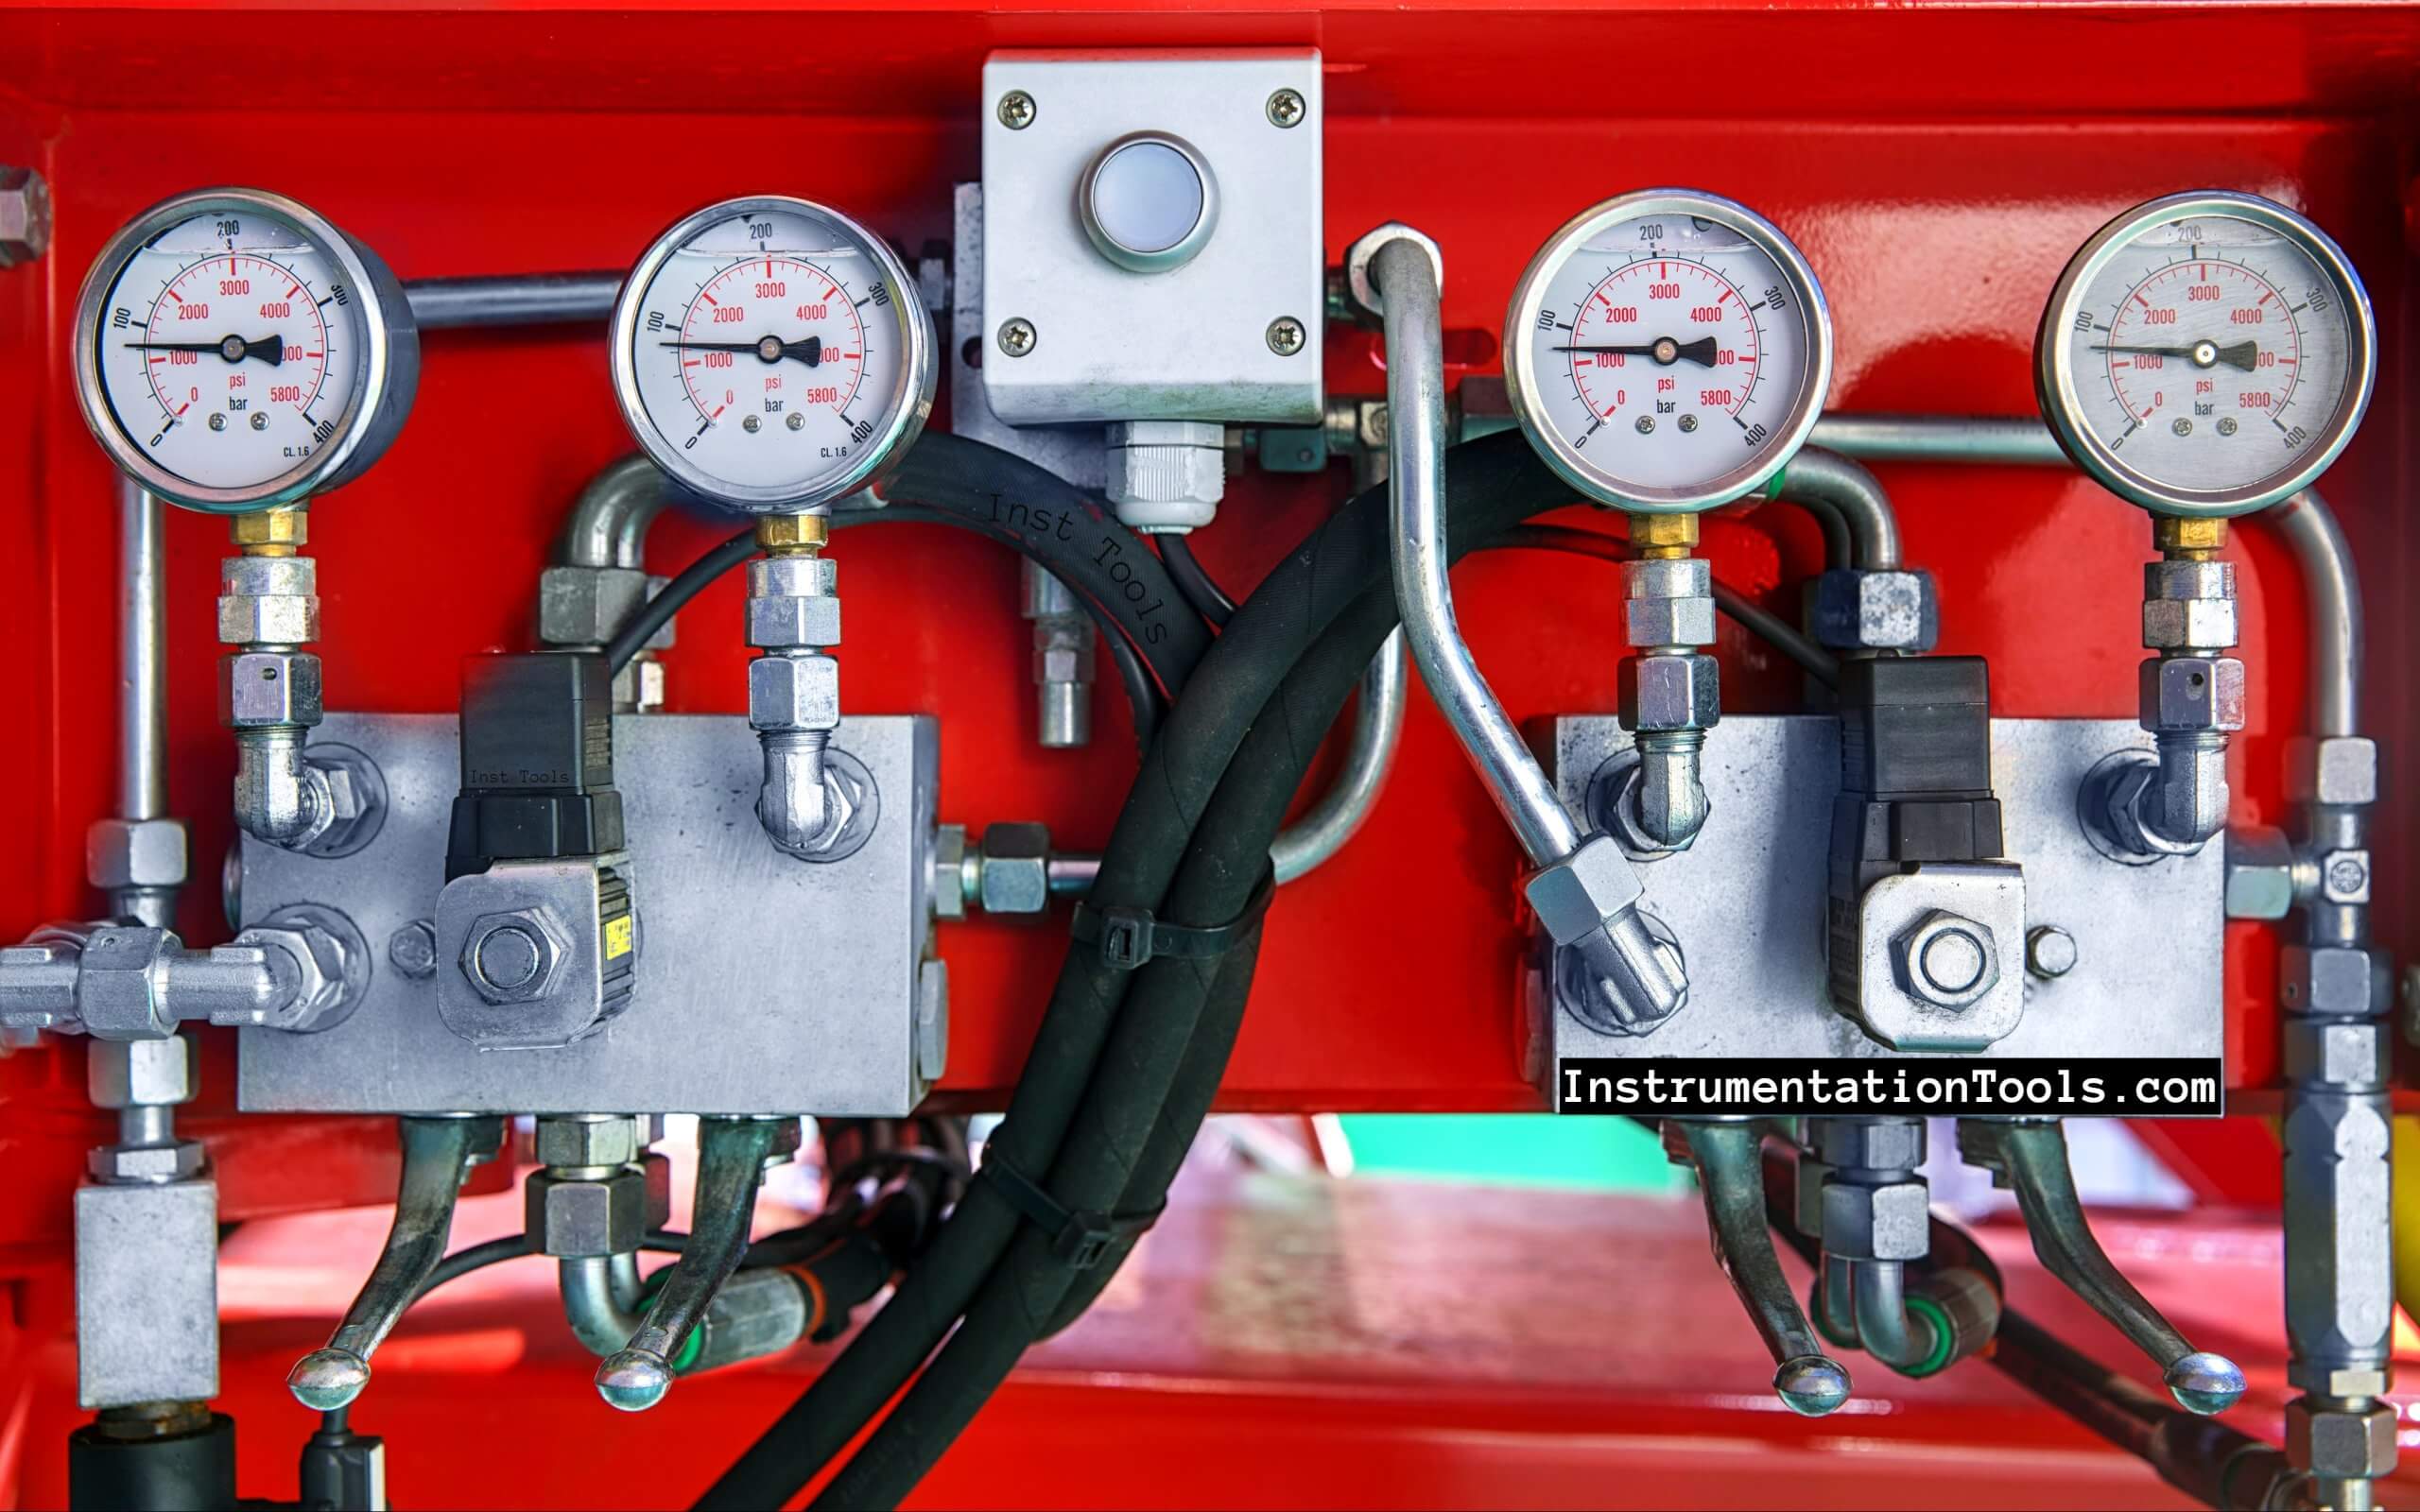 Hydraulic versus Pneumatic Systems